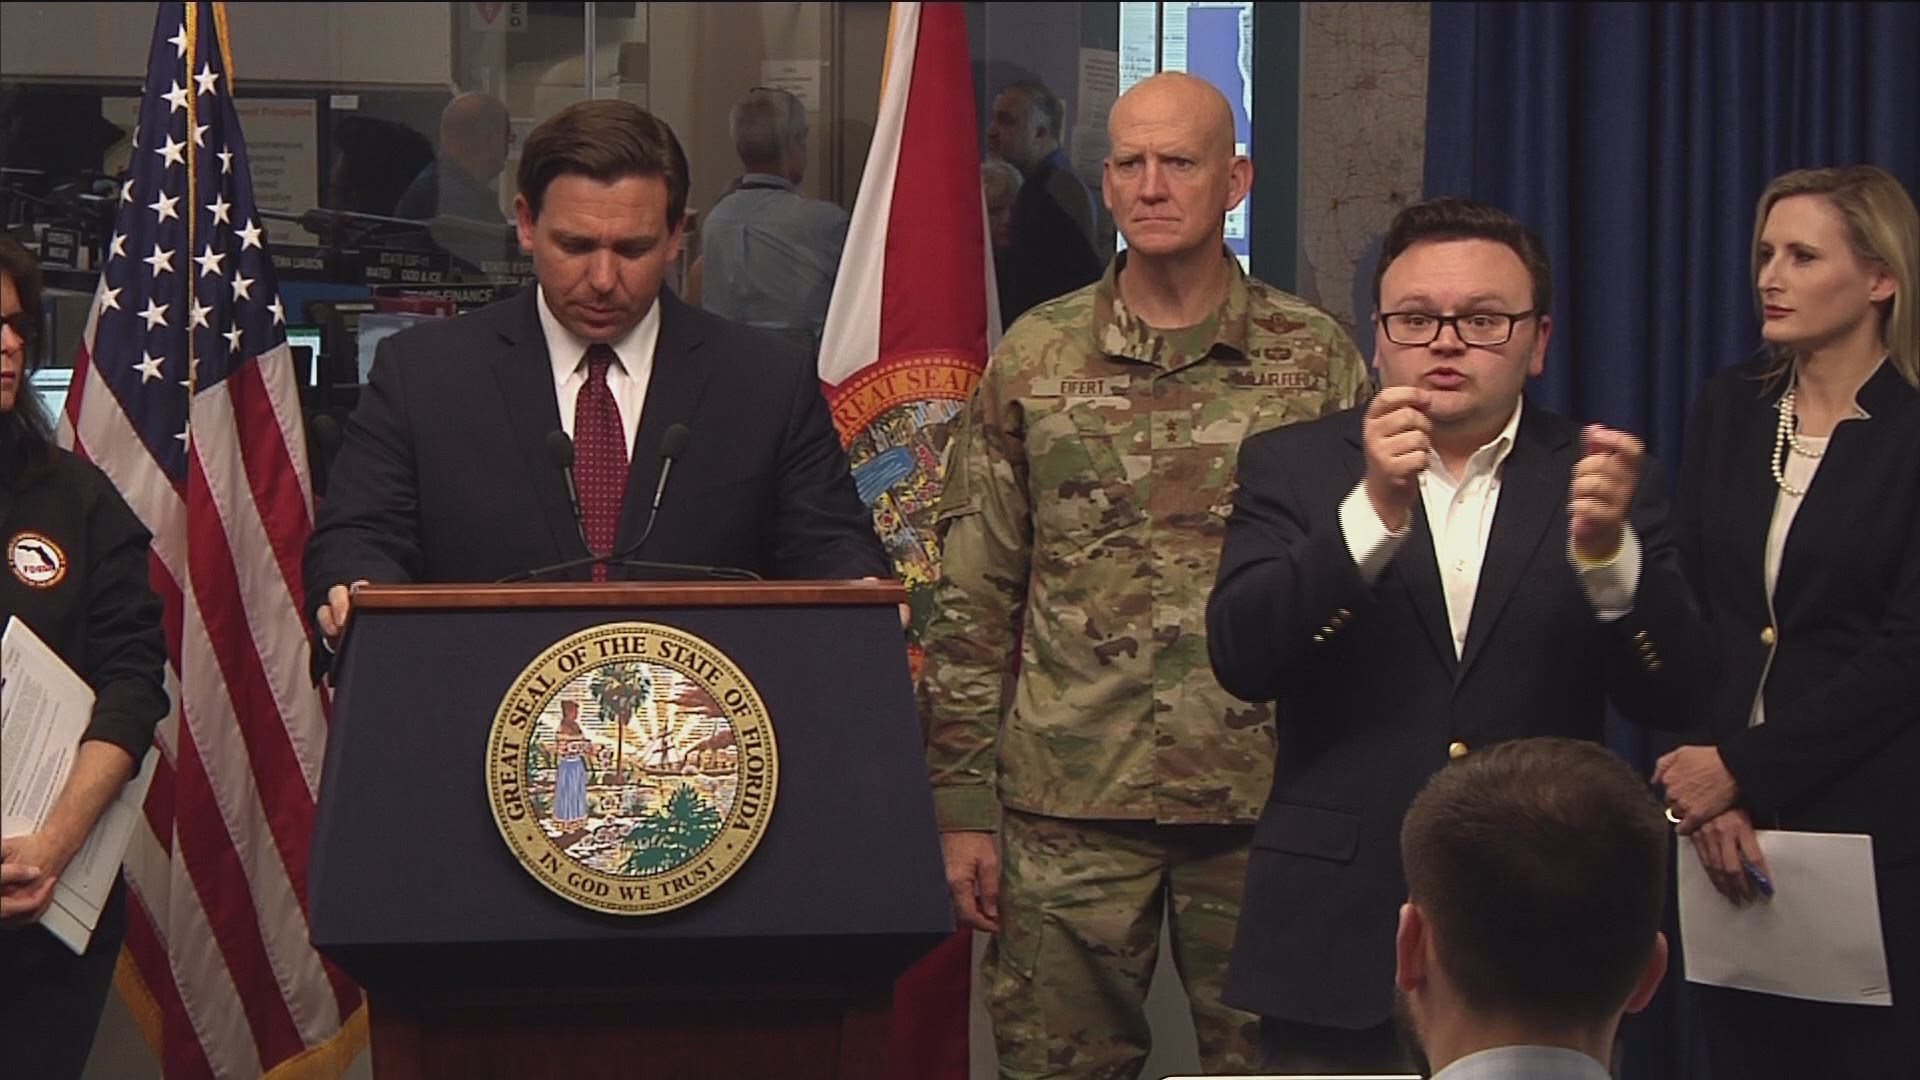 Gov. Ron DeSantis Monday announced measures for small business relief as COVID-19 forces closures across Florida.